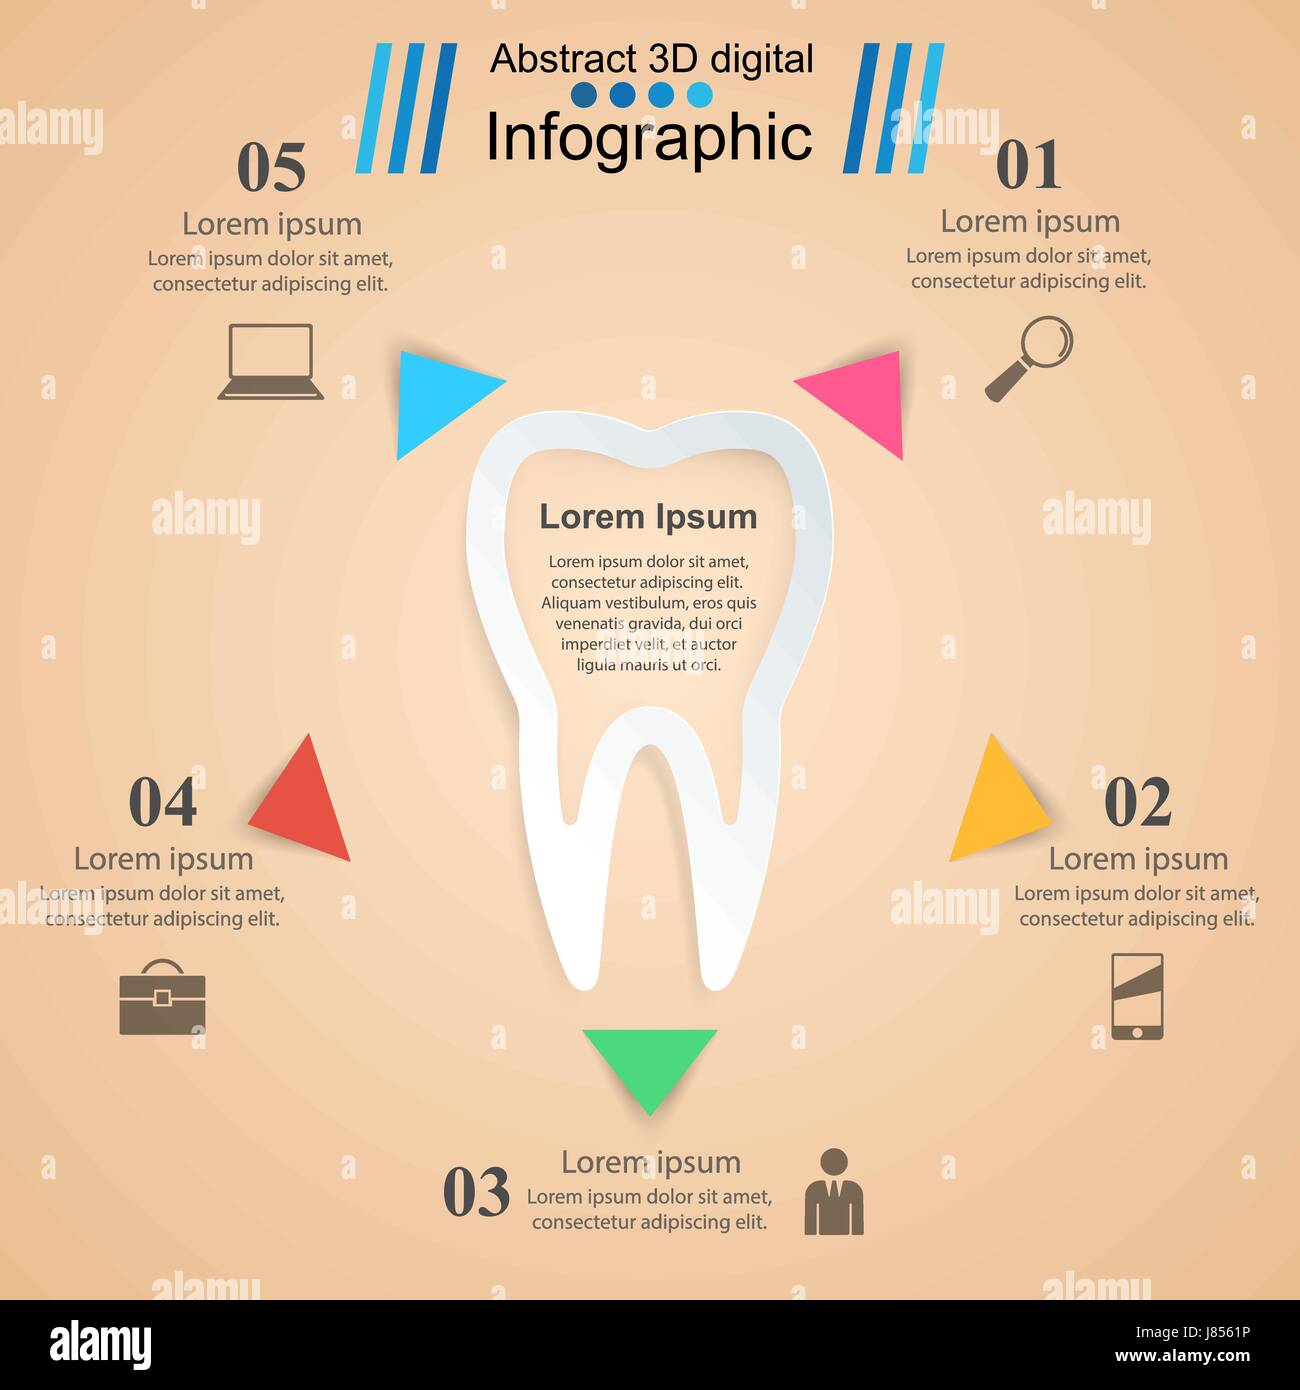 Abstract 3D digital illustration Infographic. Tooth icon. Stock Vector